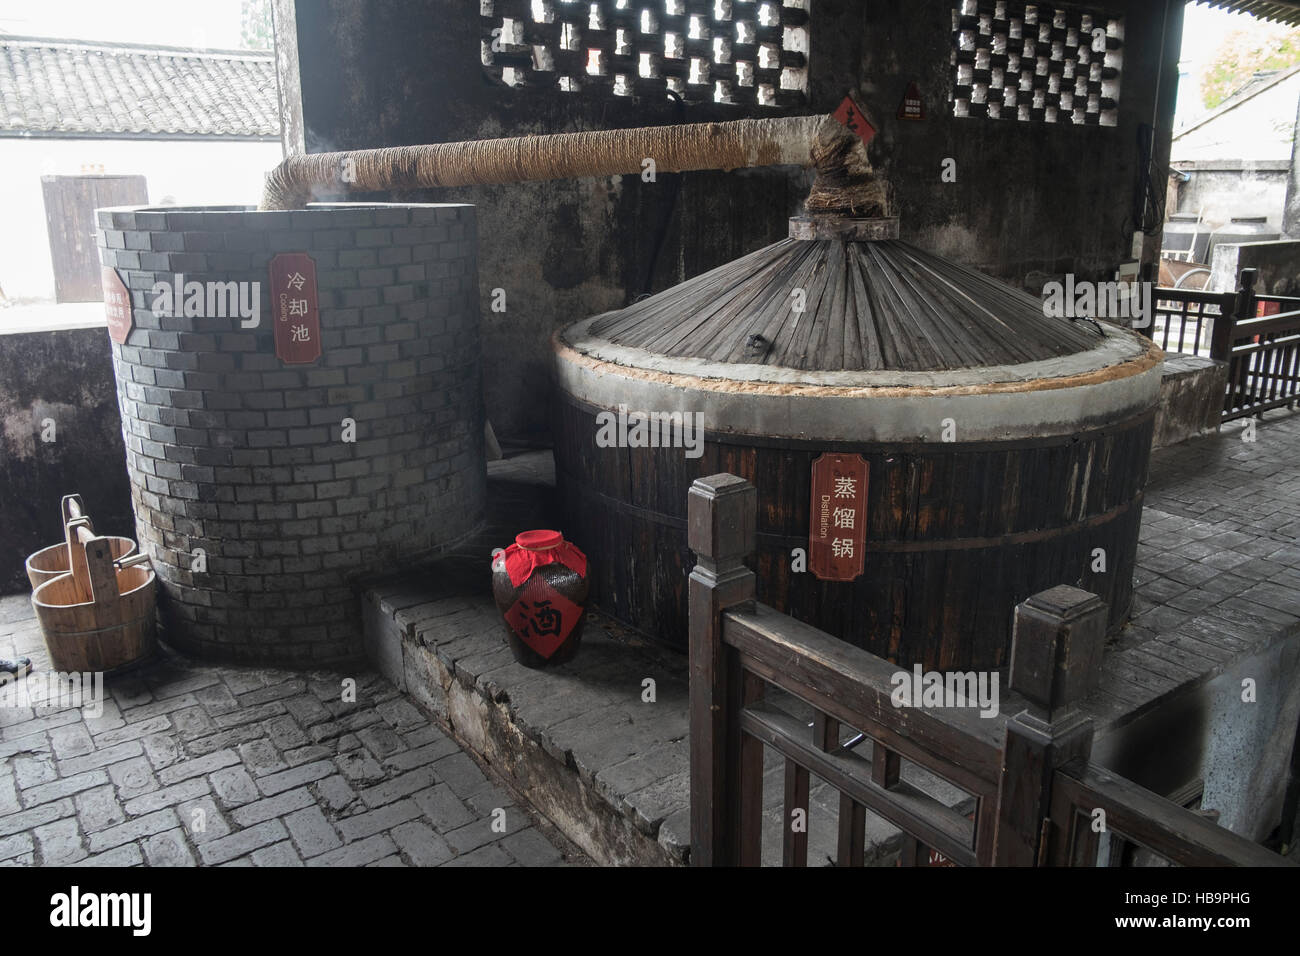 chinese traditional rise brew distilled spirit Stock Photo